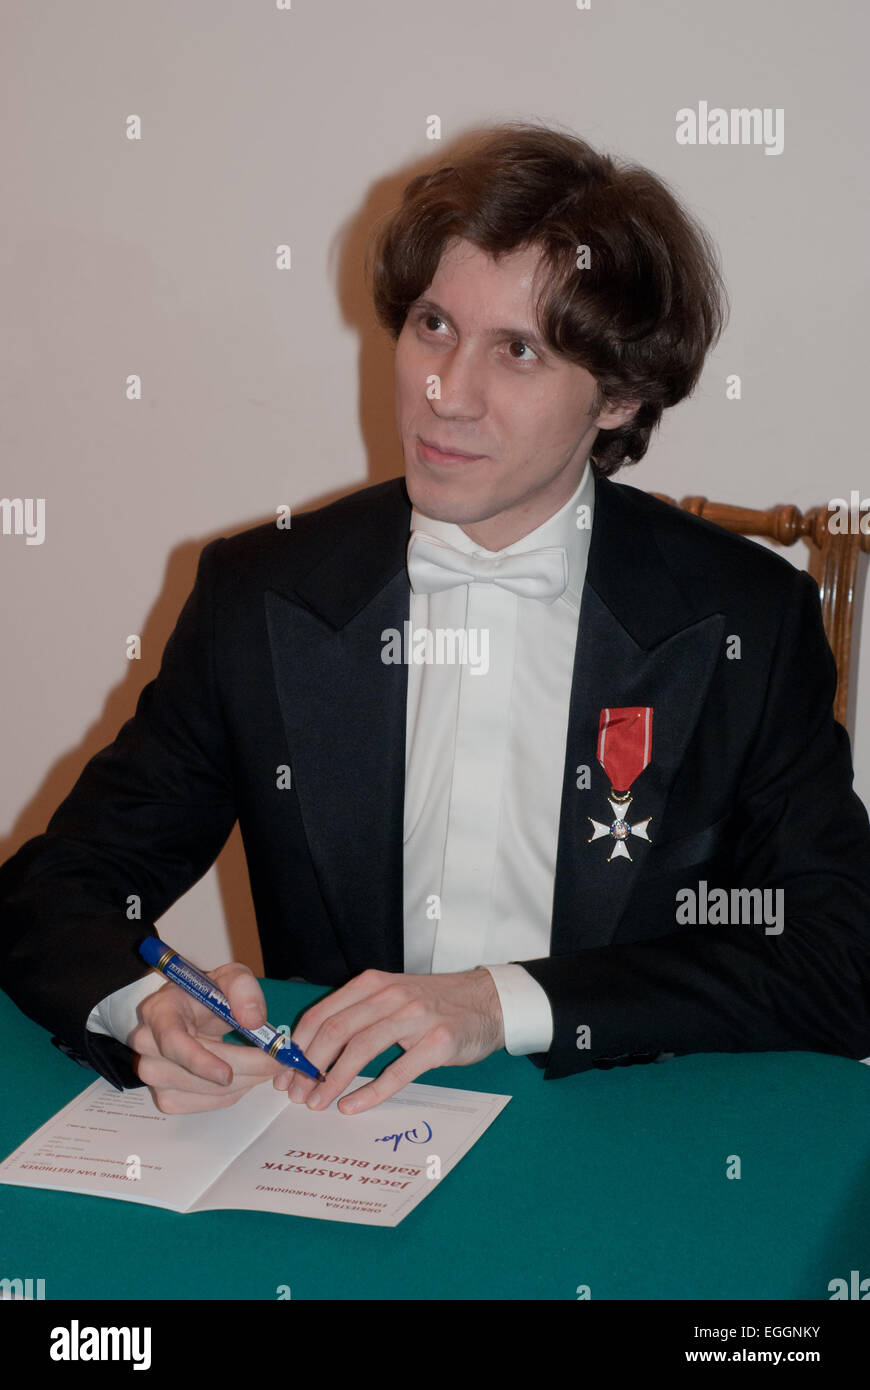 Warsaw, Poland. 24th February, 2015. Polish pianist Rafał Blechacz, winner of 2005 International Chopin Competition, takes autographs after his concert in Warsaw Philharmonic when he was honoured by Knight's Cross Order of Polonia Restituta Credit:  Jakub Siemiaczko/Alamy Live News Stock Photo